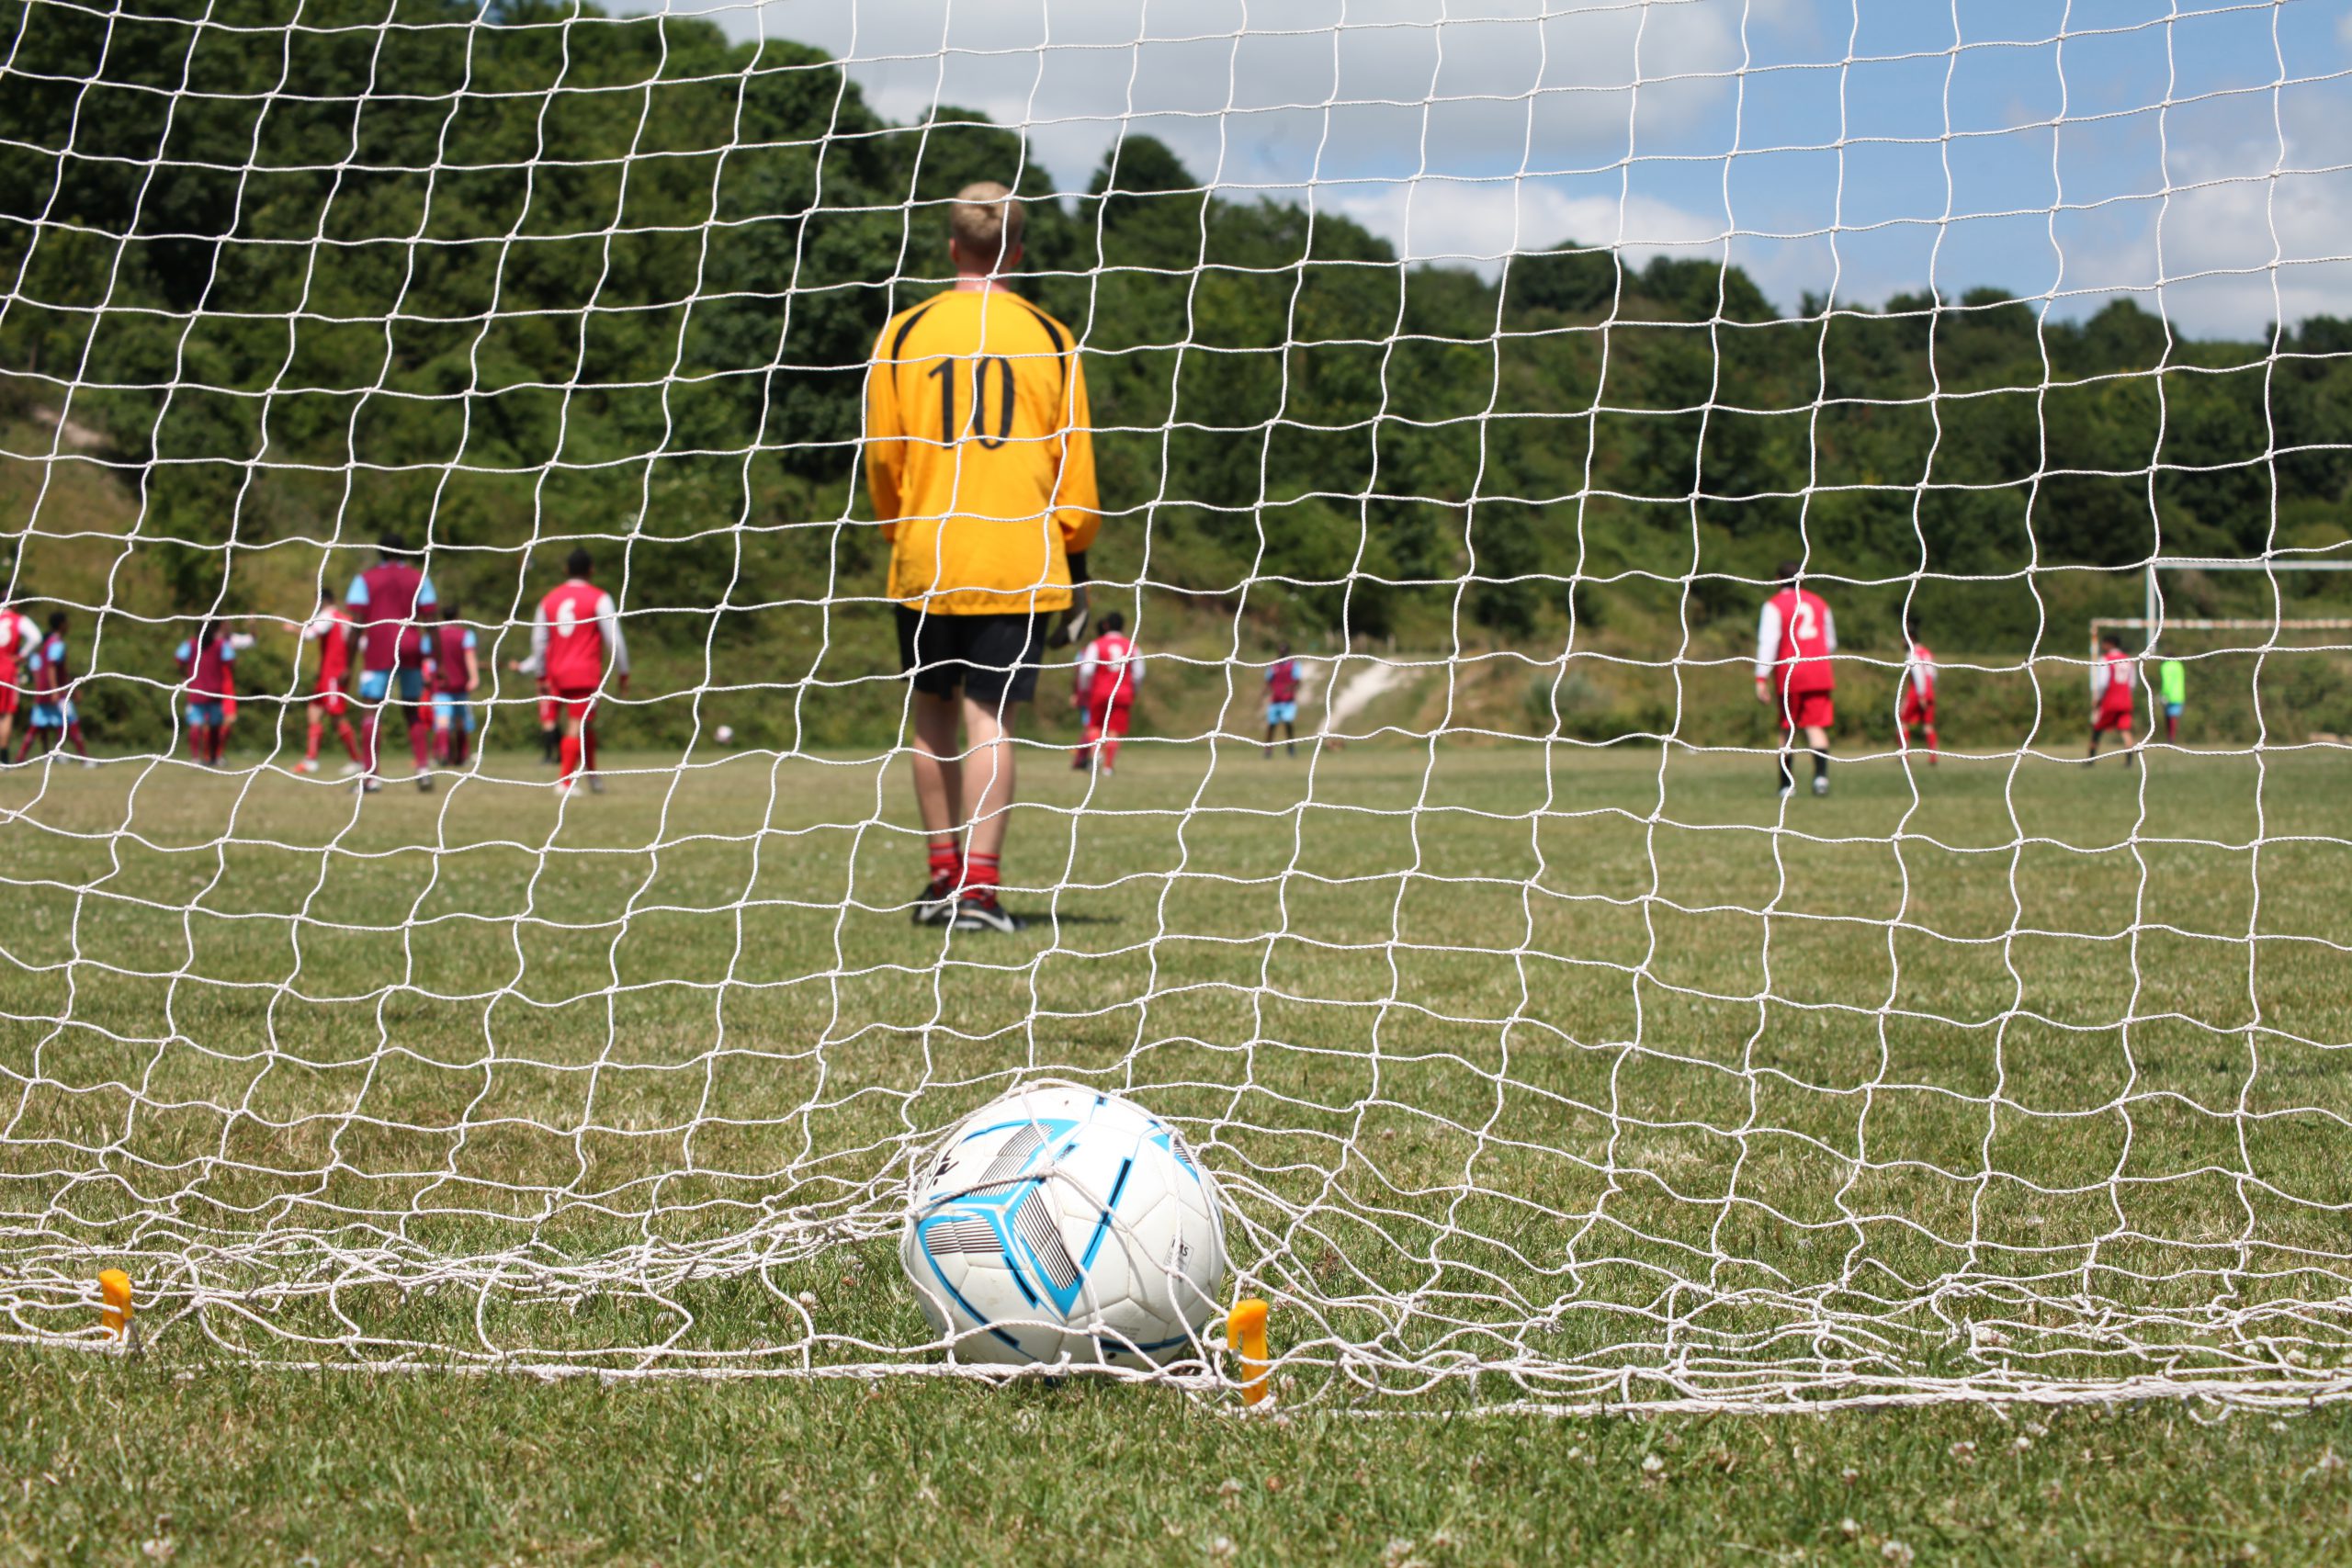 Photo of a football in a goal net, taken from behind the goal with the back of a player in a yellow goalkeeper shirt looking away from us')